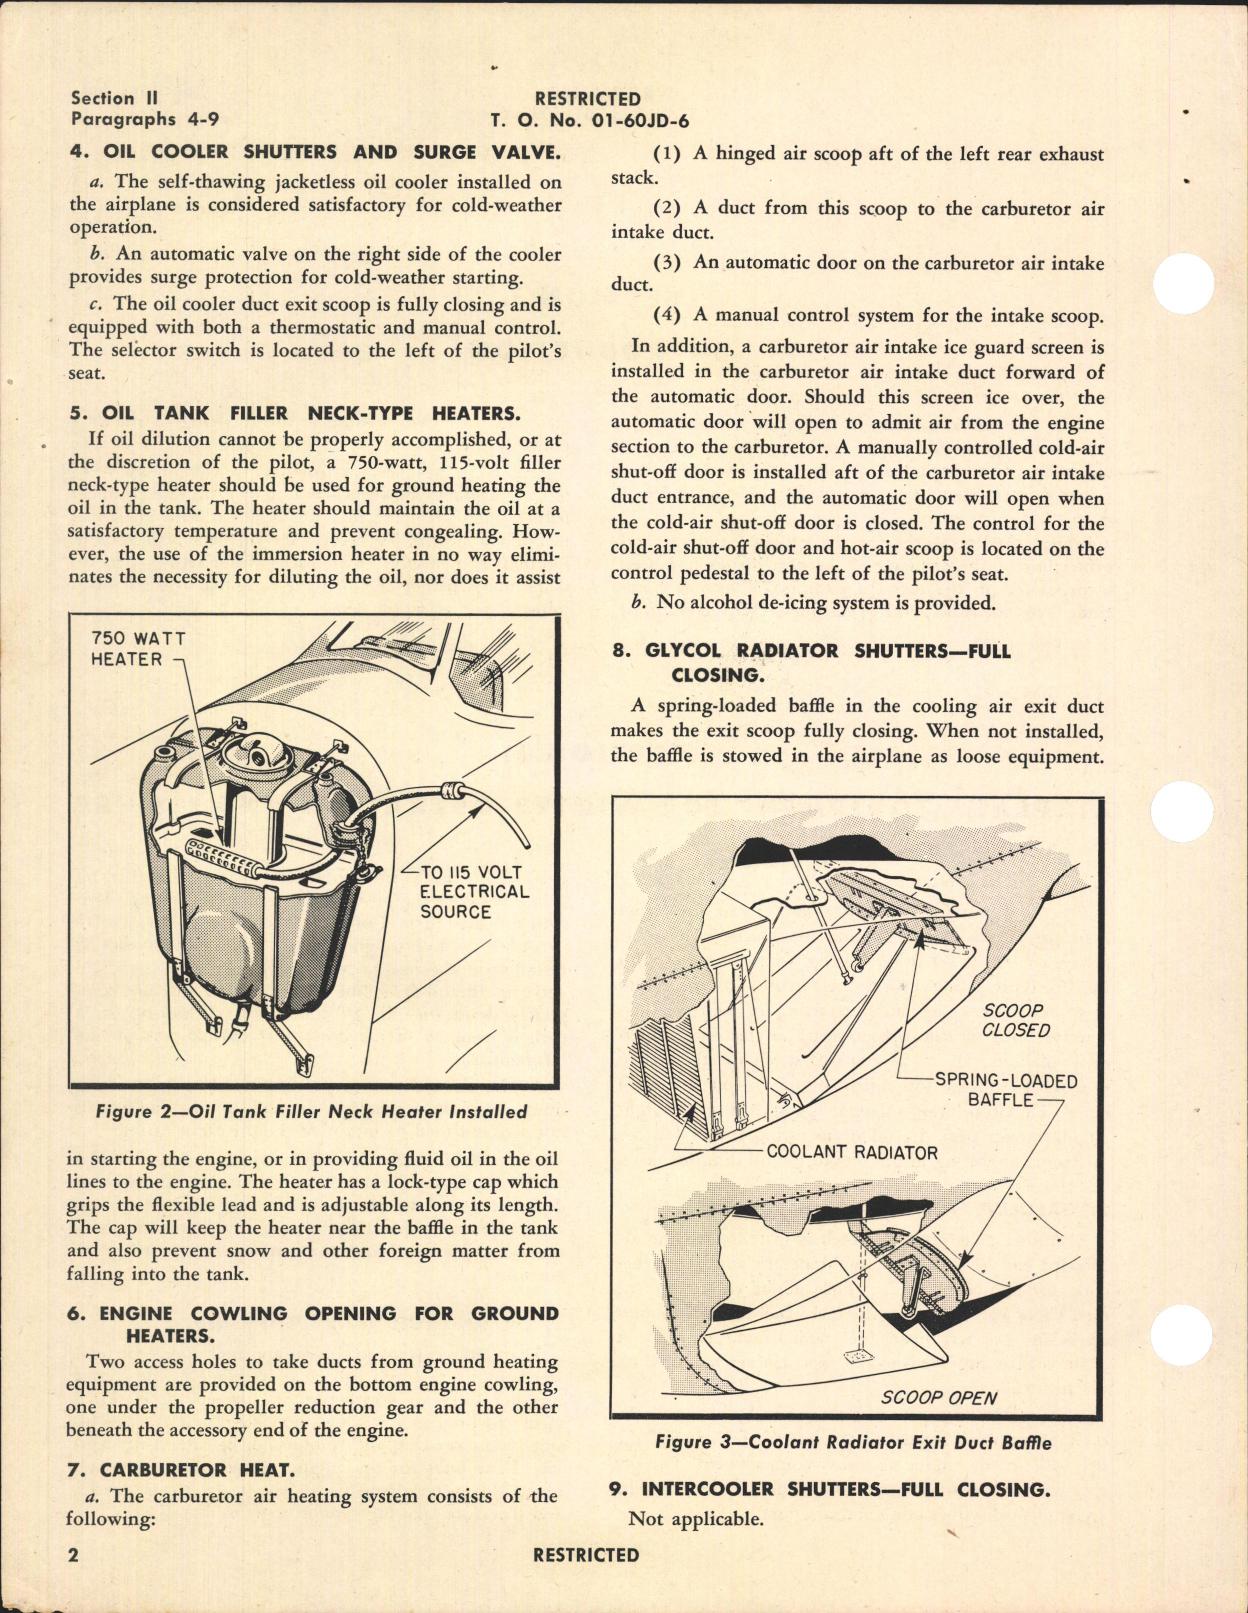 Sample page 6 from AirCorps Library document: Handbook of Instructions for Winterized P-51B-5 and P-51C-1 Series Airplanes